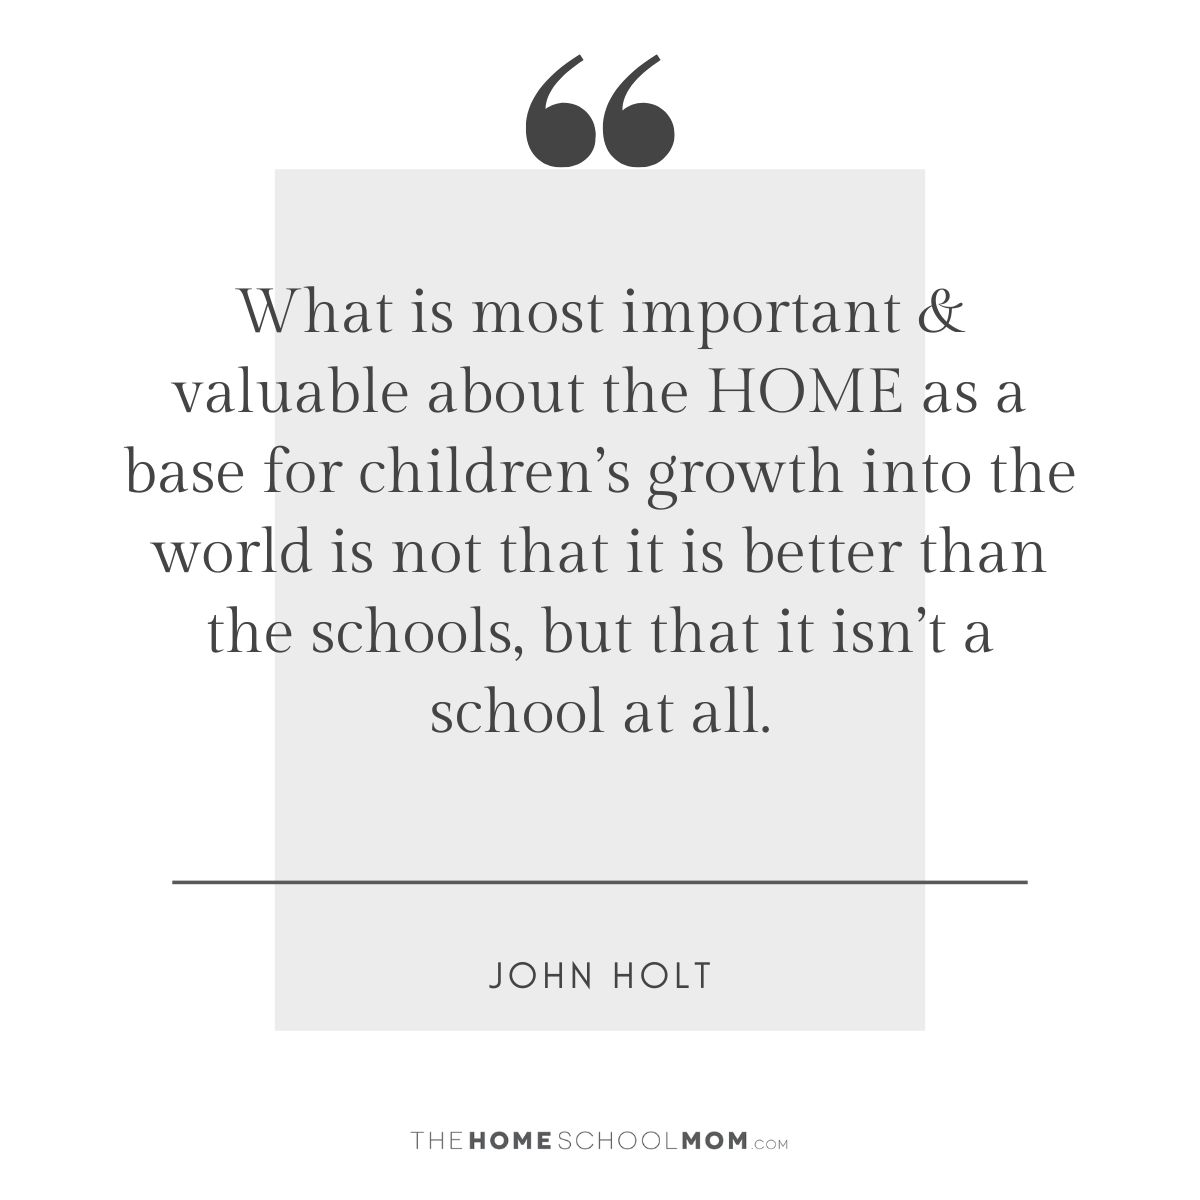 What is most important & valuable about the HOME as a base for children’s growth into the world is not that it is better than the schools, but that it isn’t a school at all - John Holt.